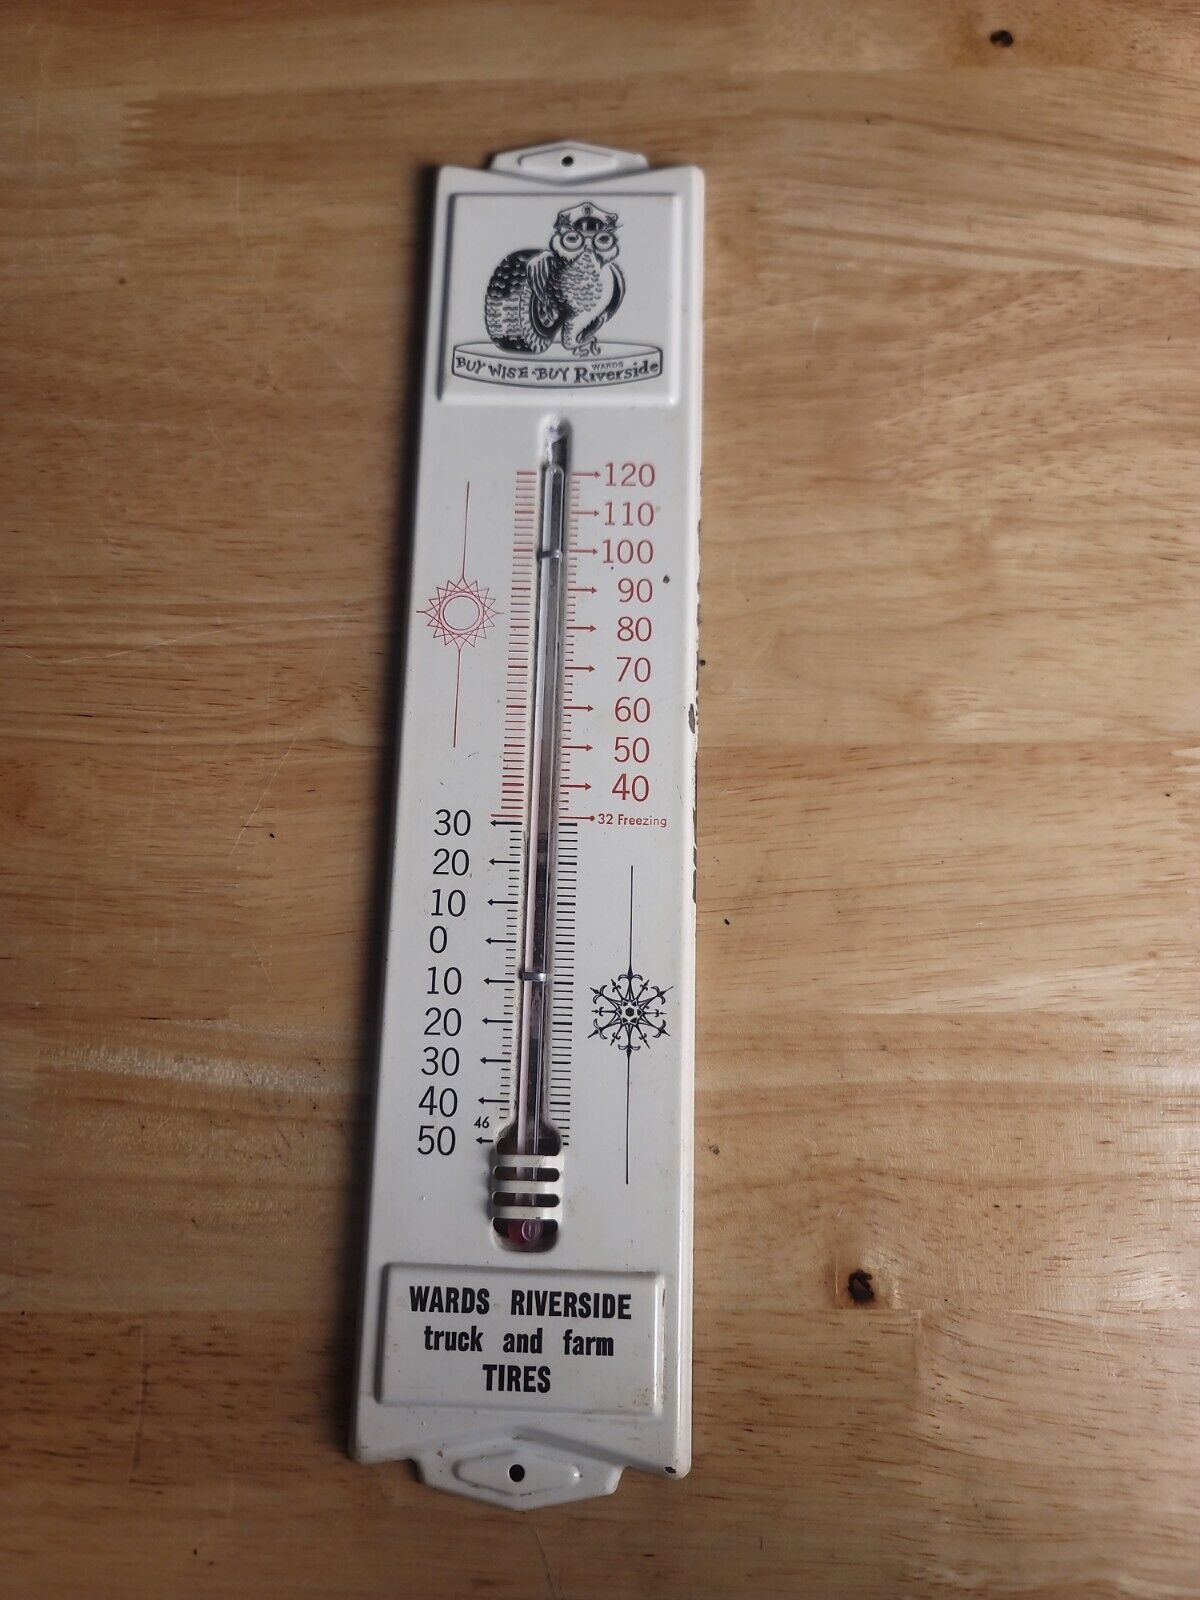 VINTAGE WARDS RIVERSIDE TRUCK & FARM TIRES THERMOMETER 